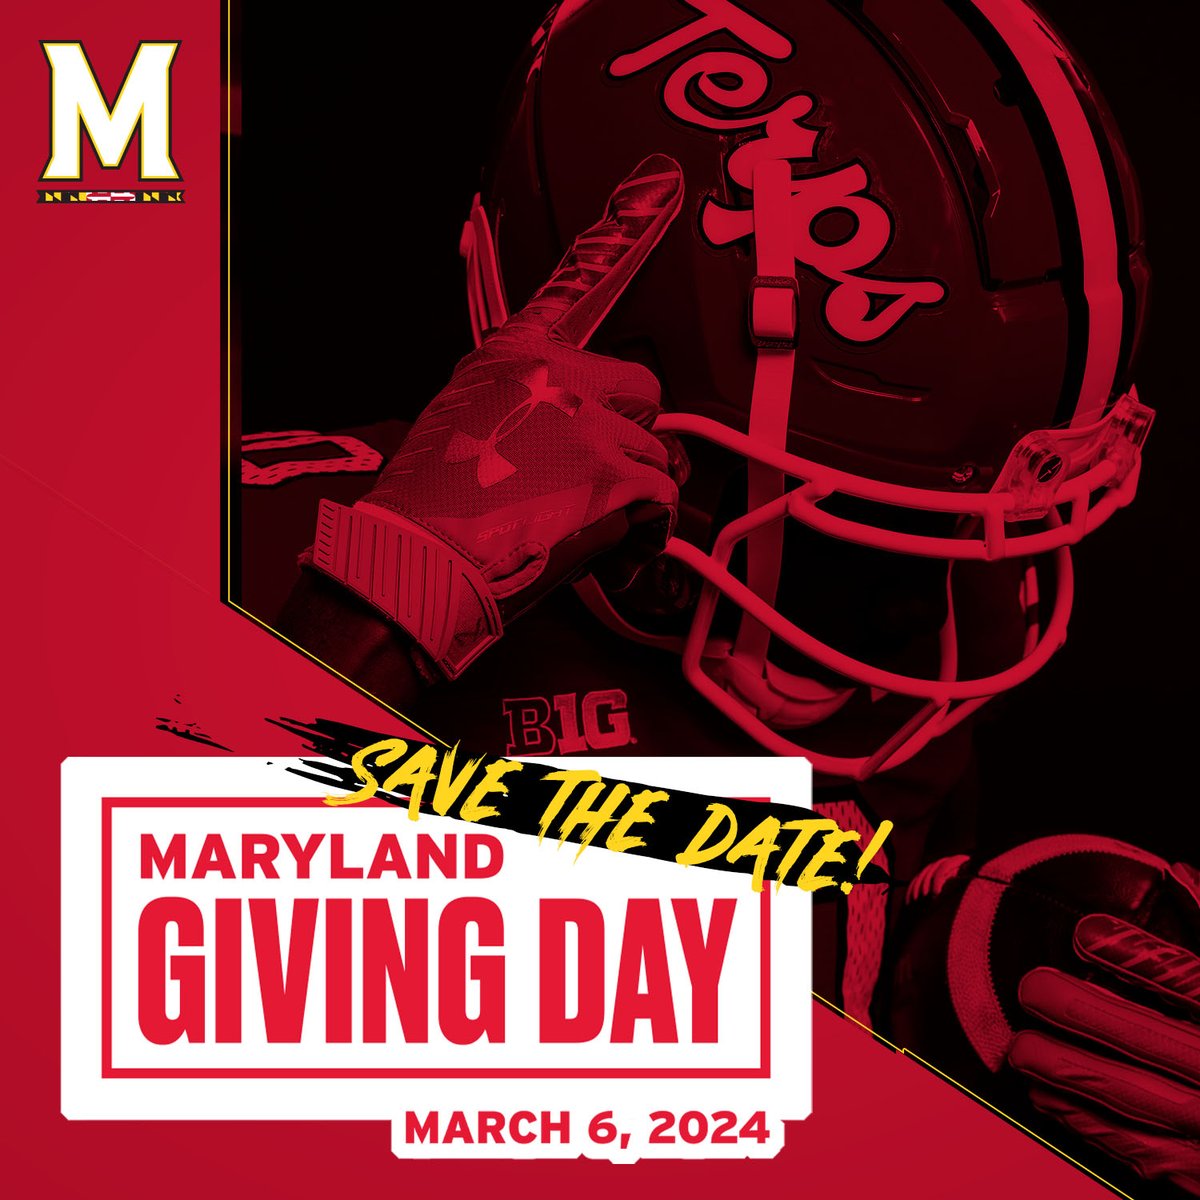 The Best is Ahead #GivingDayUMD. March 6.